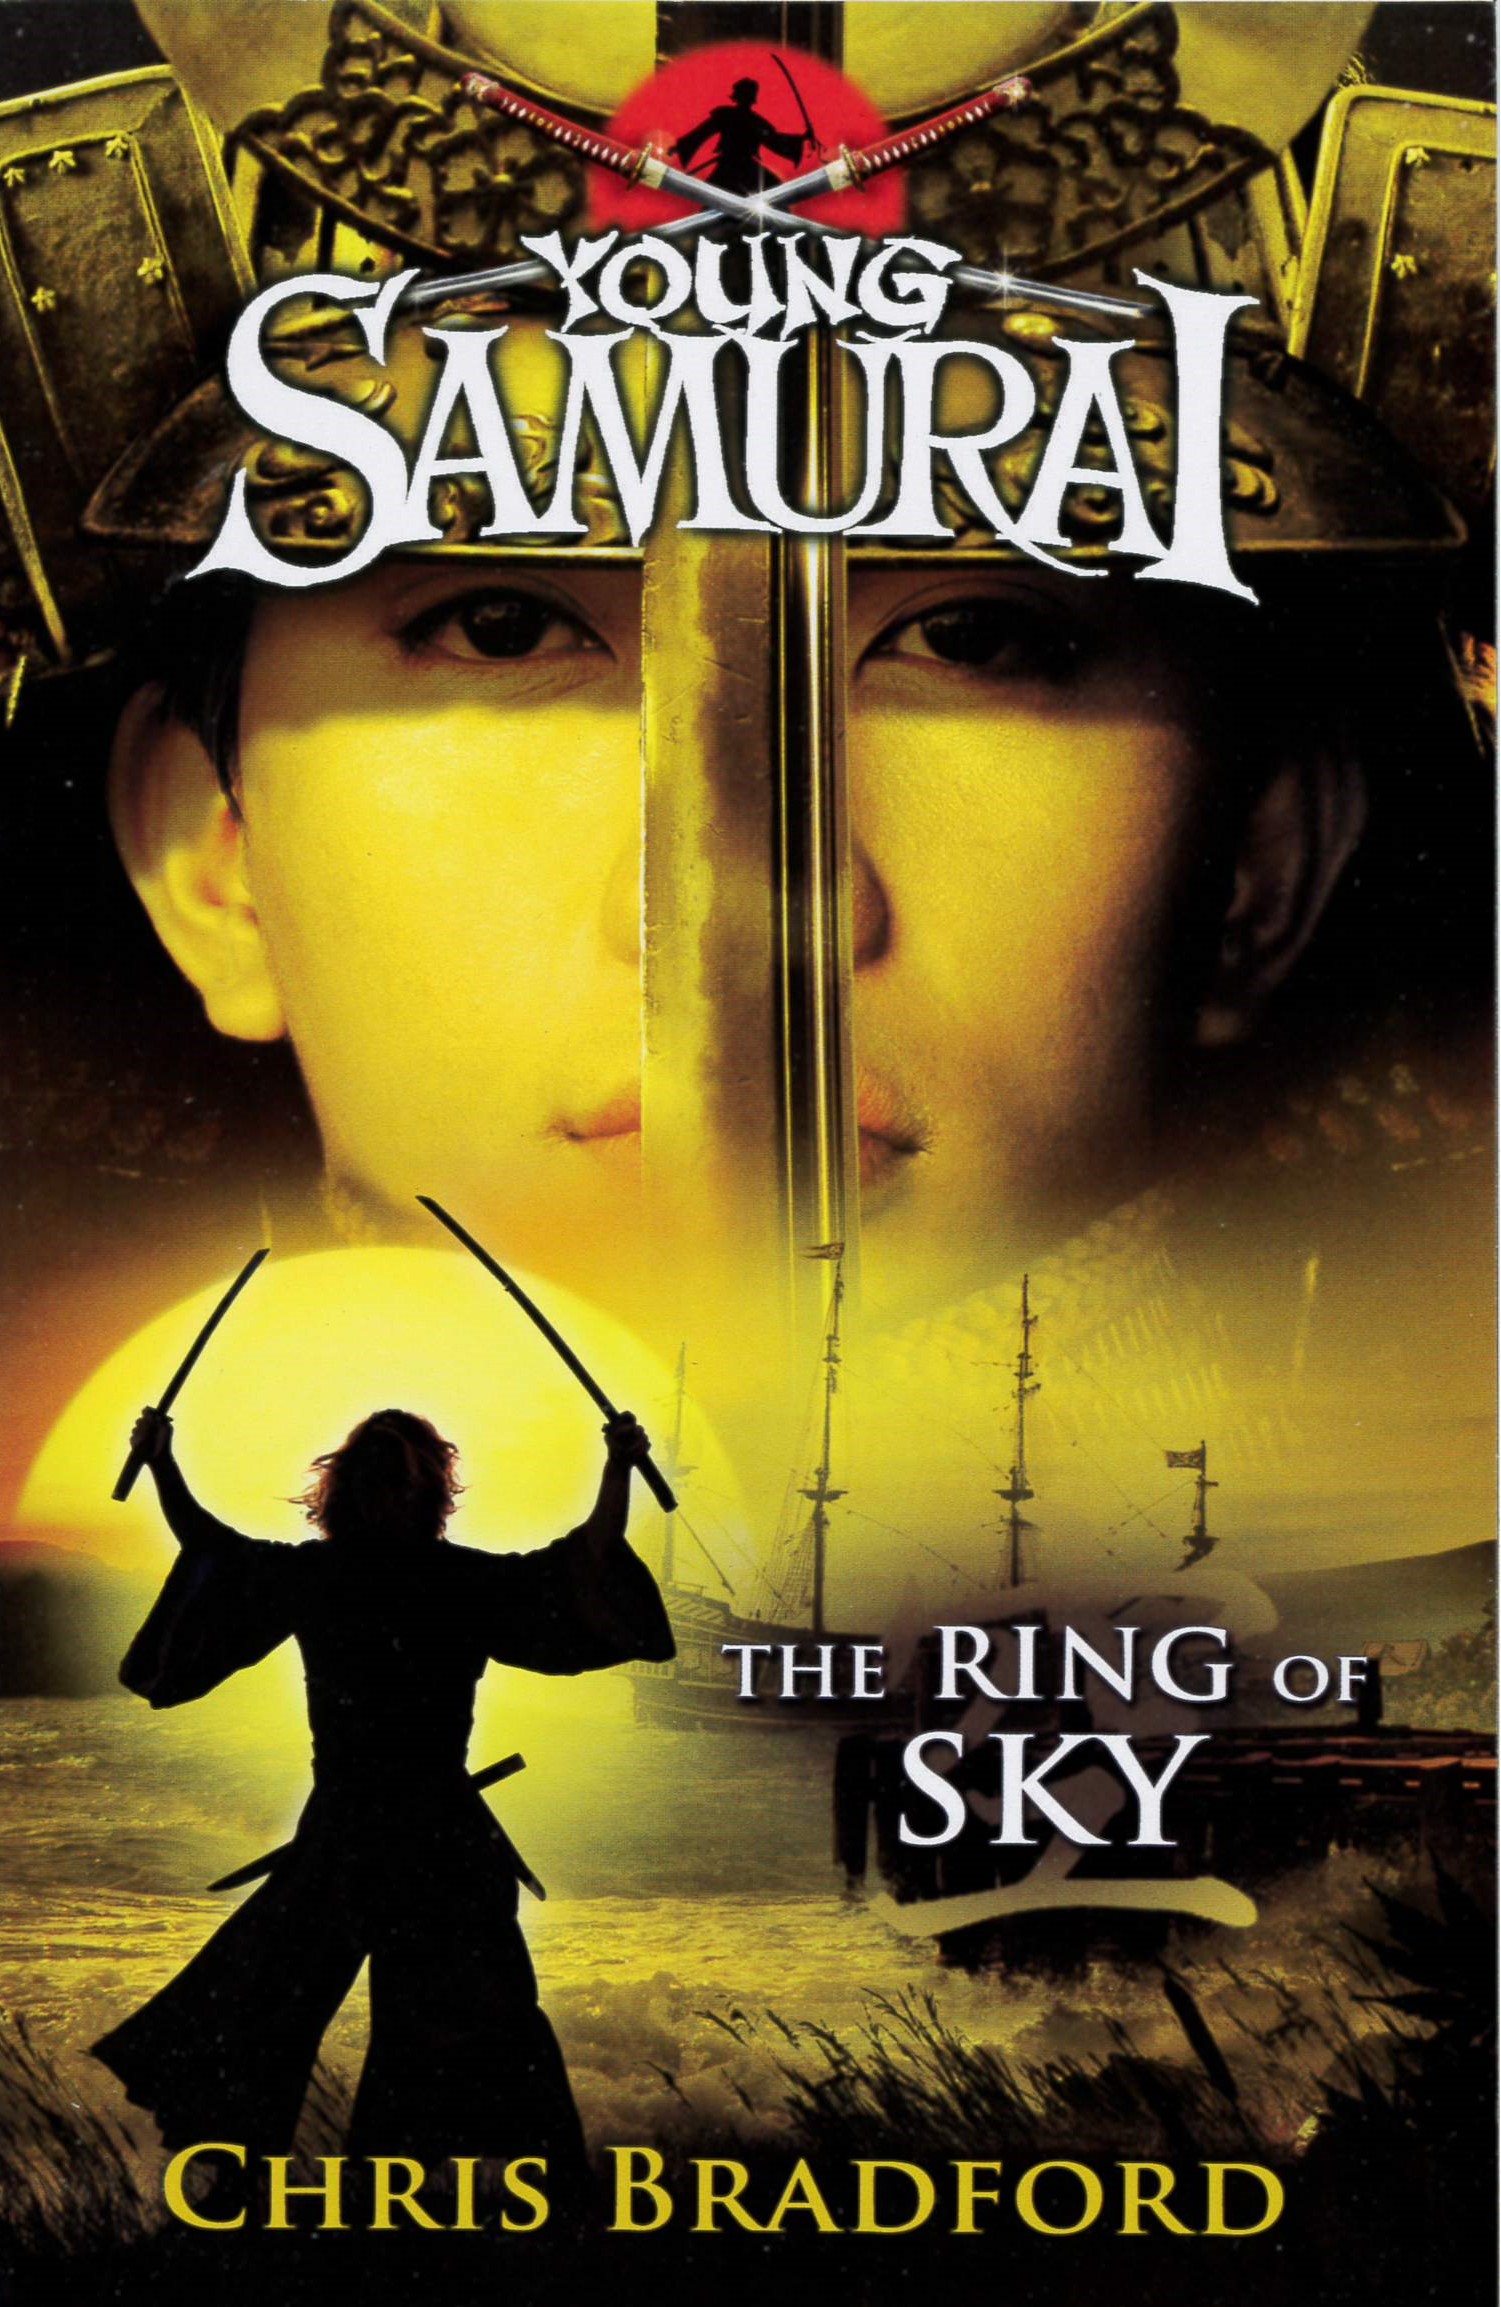 The ring of sky